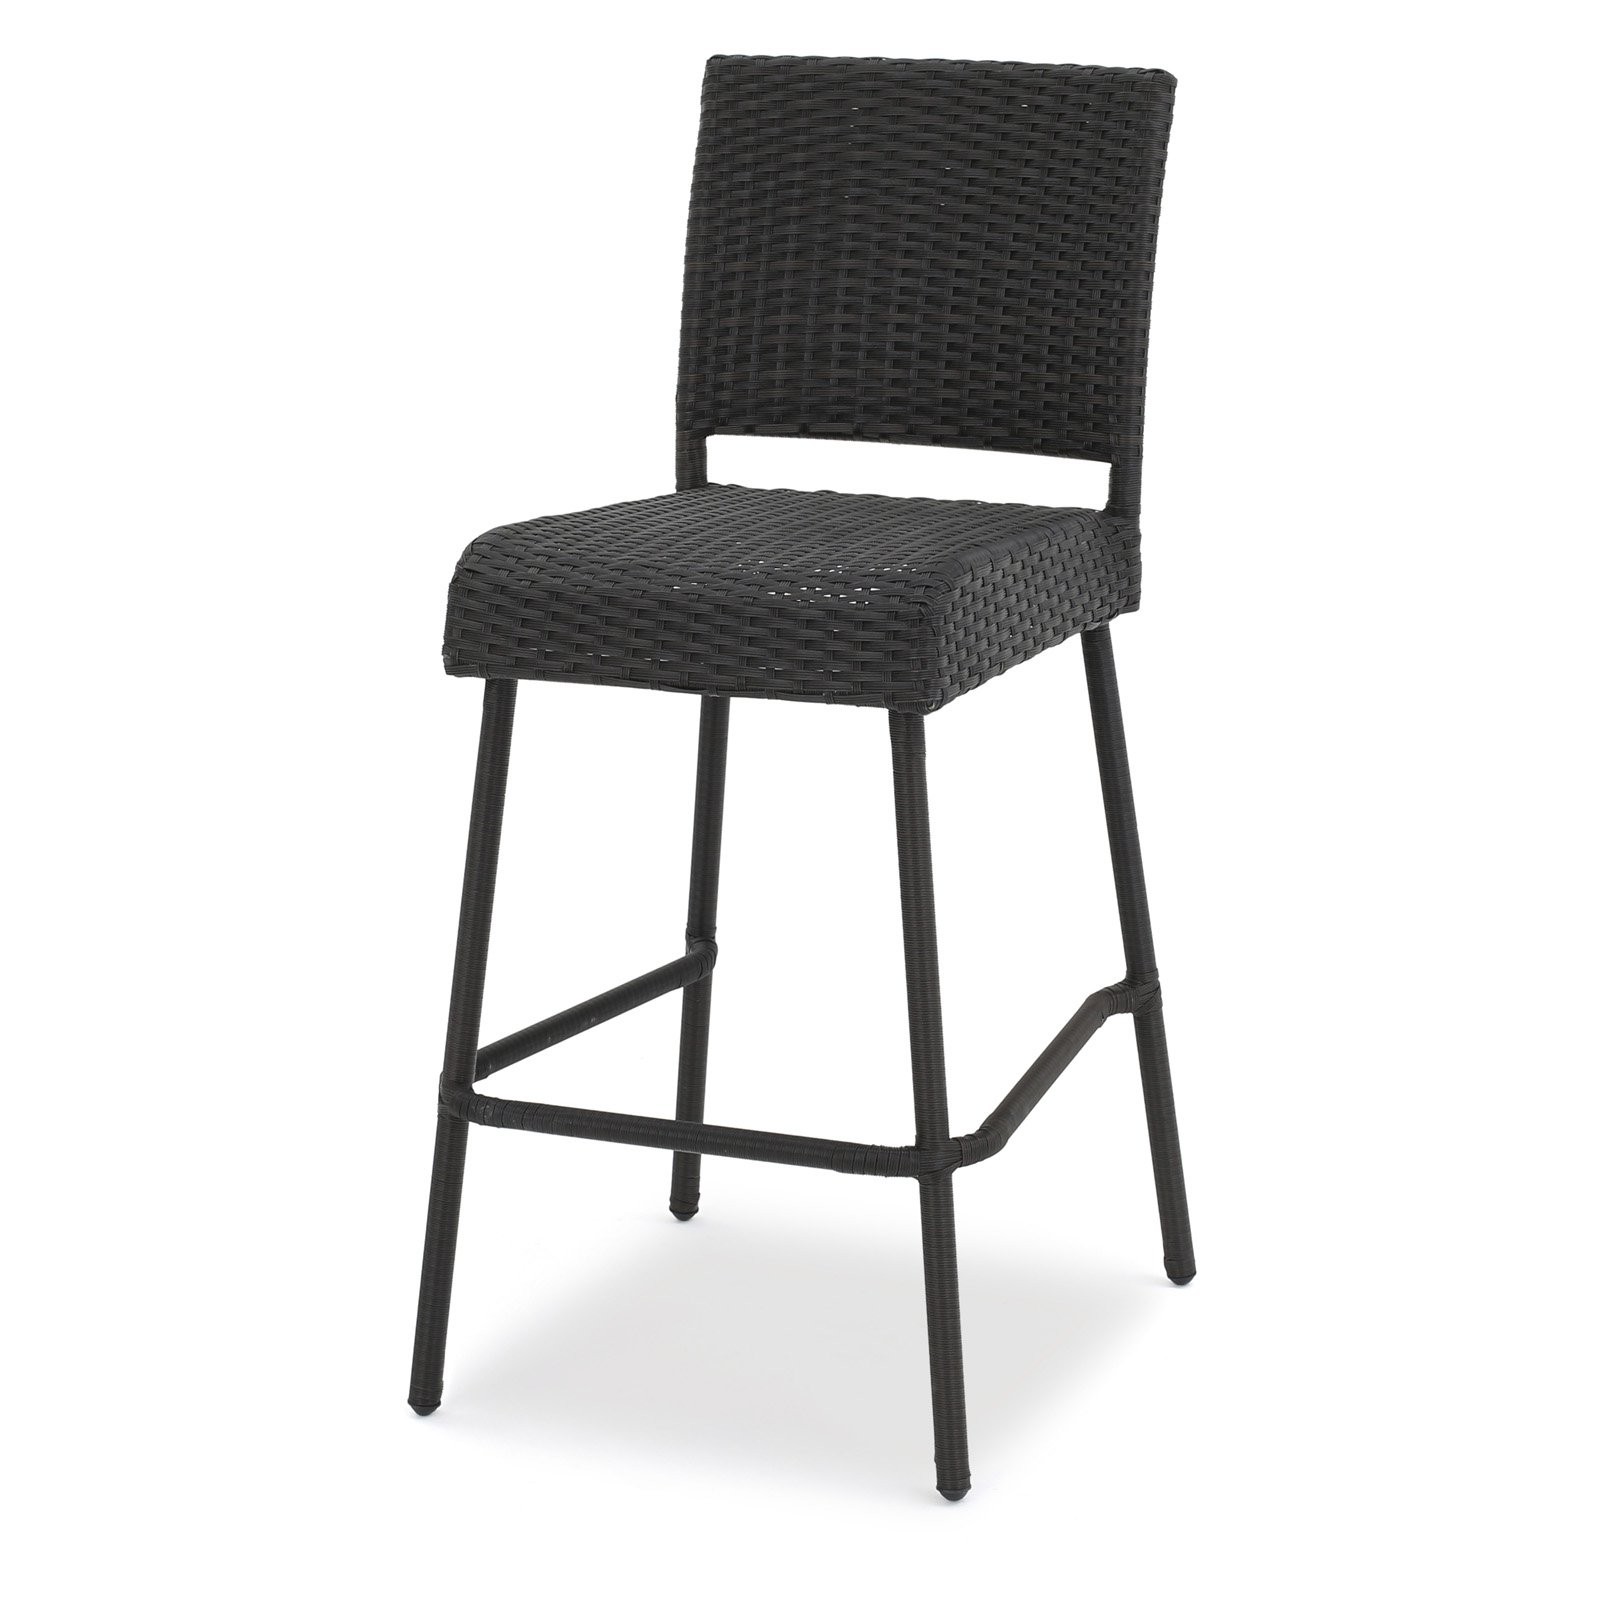 Trestle 29-Inch Outdoors Dark Brown Wicker Barstools (Set of 2) - image 1 of 11